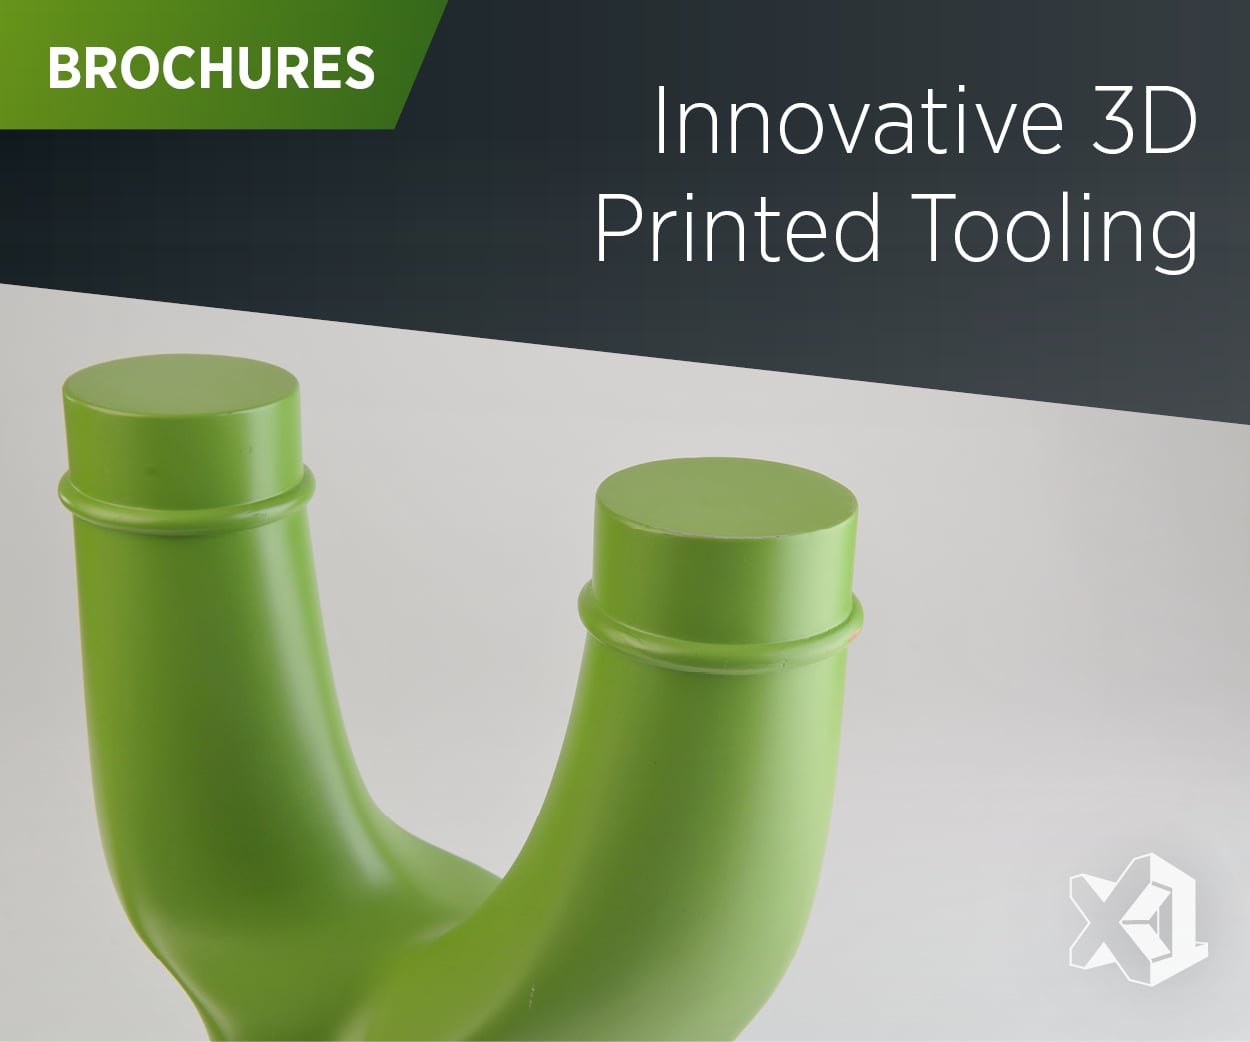 Innovative 3D Printed Tooling